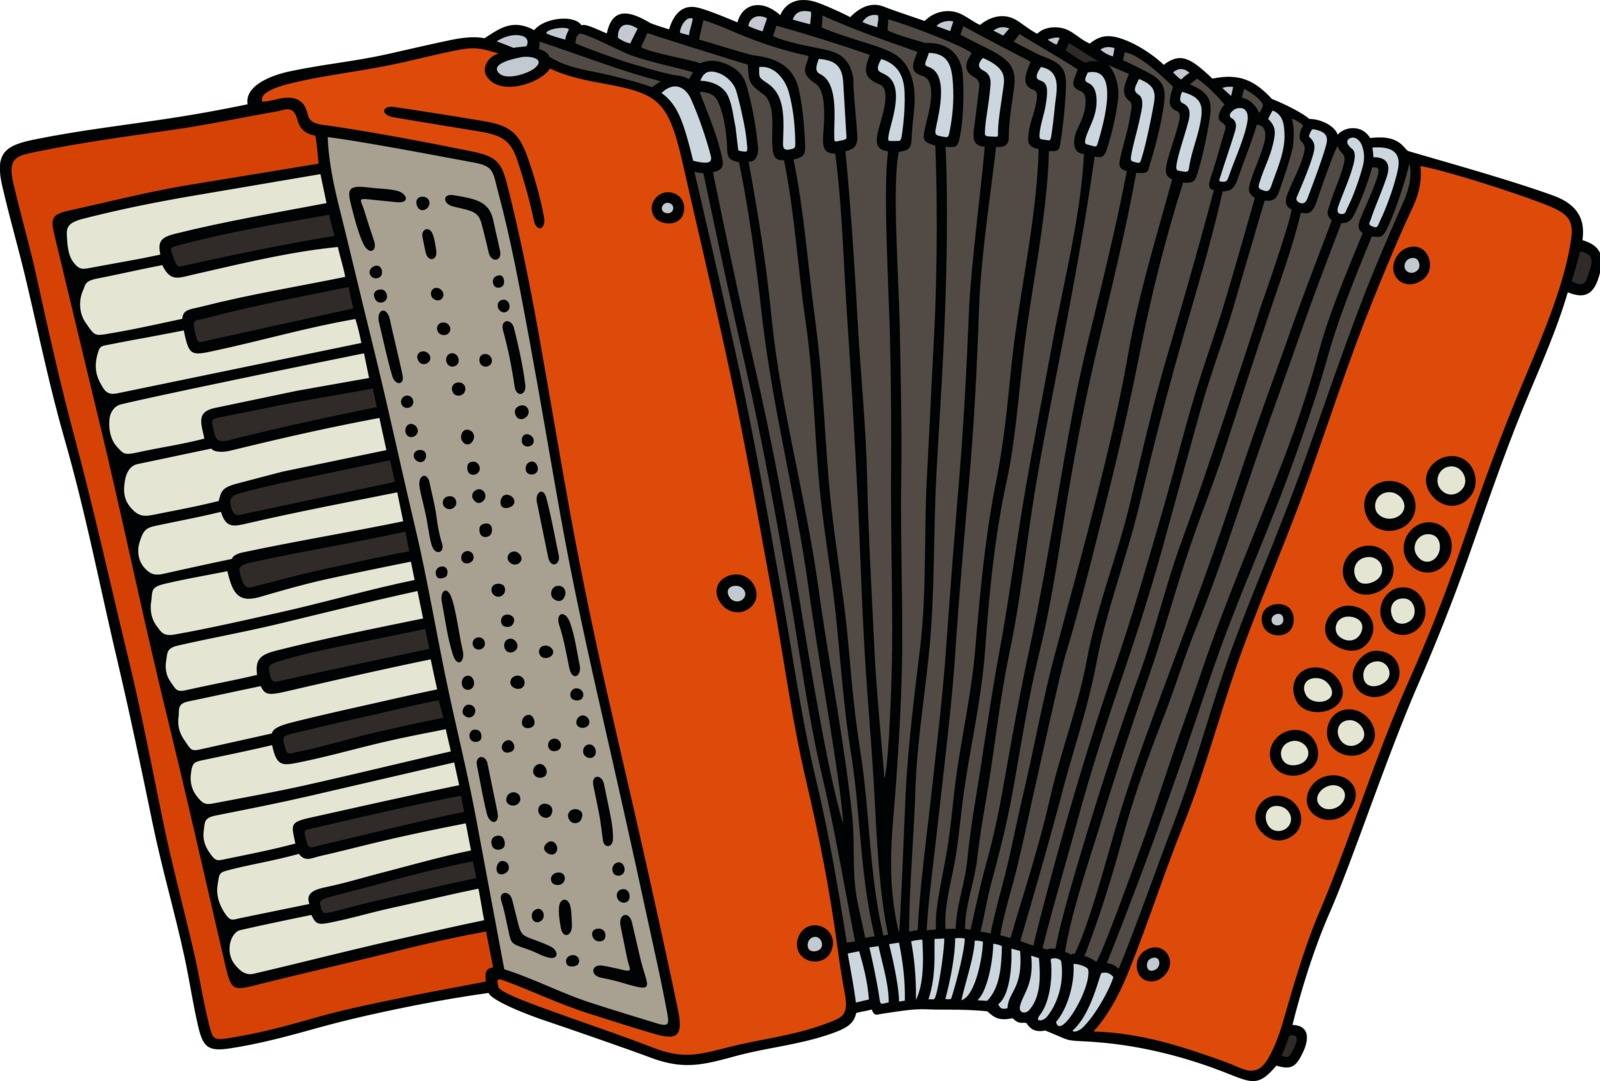 Classic red accordion by vostal